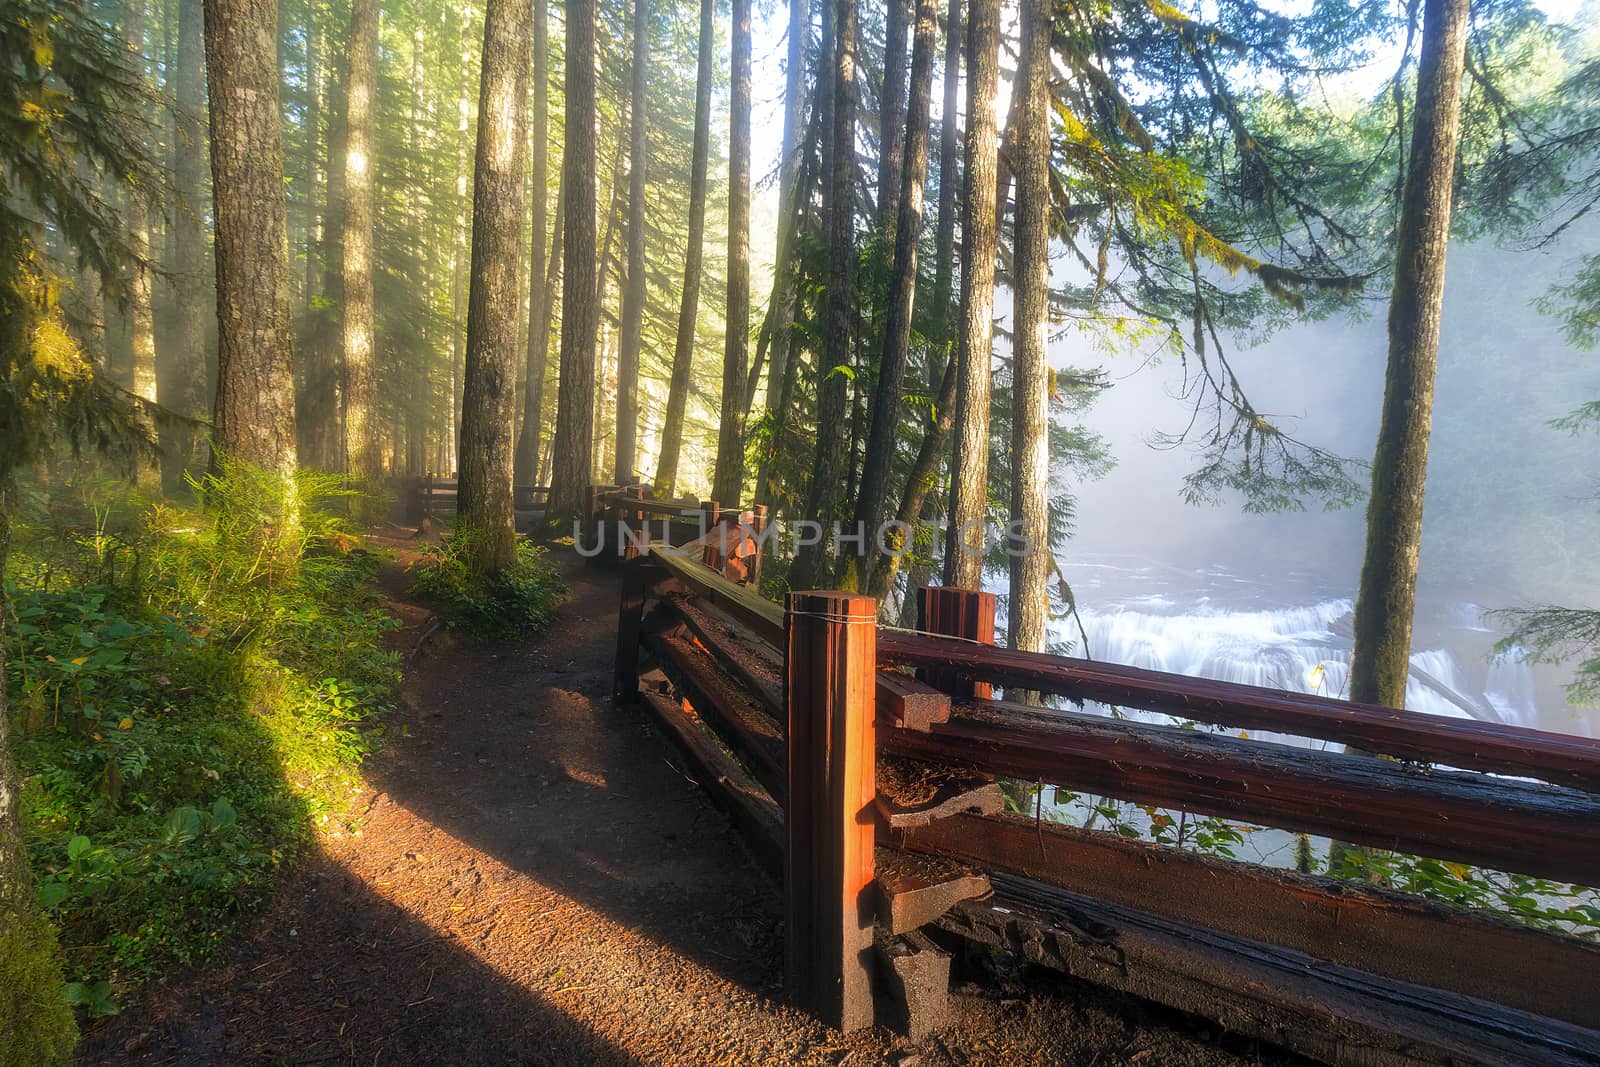 Lower Leis River hikng trail in Washington State with afternoon sunlight